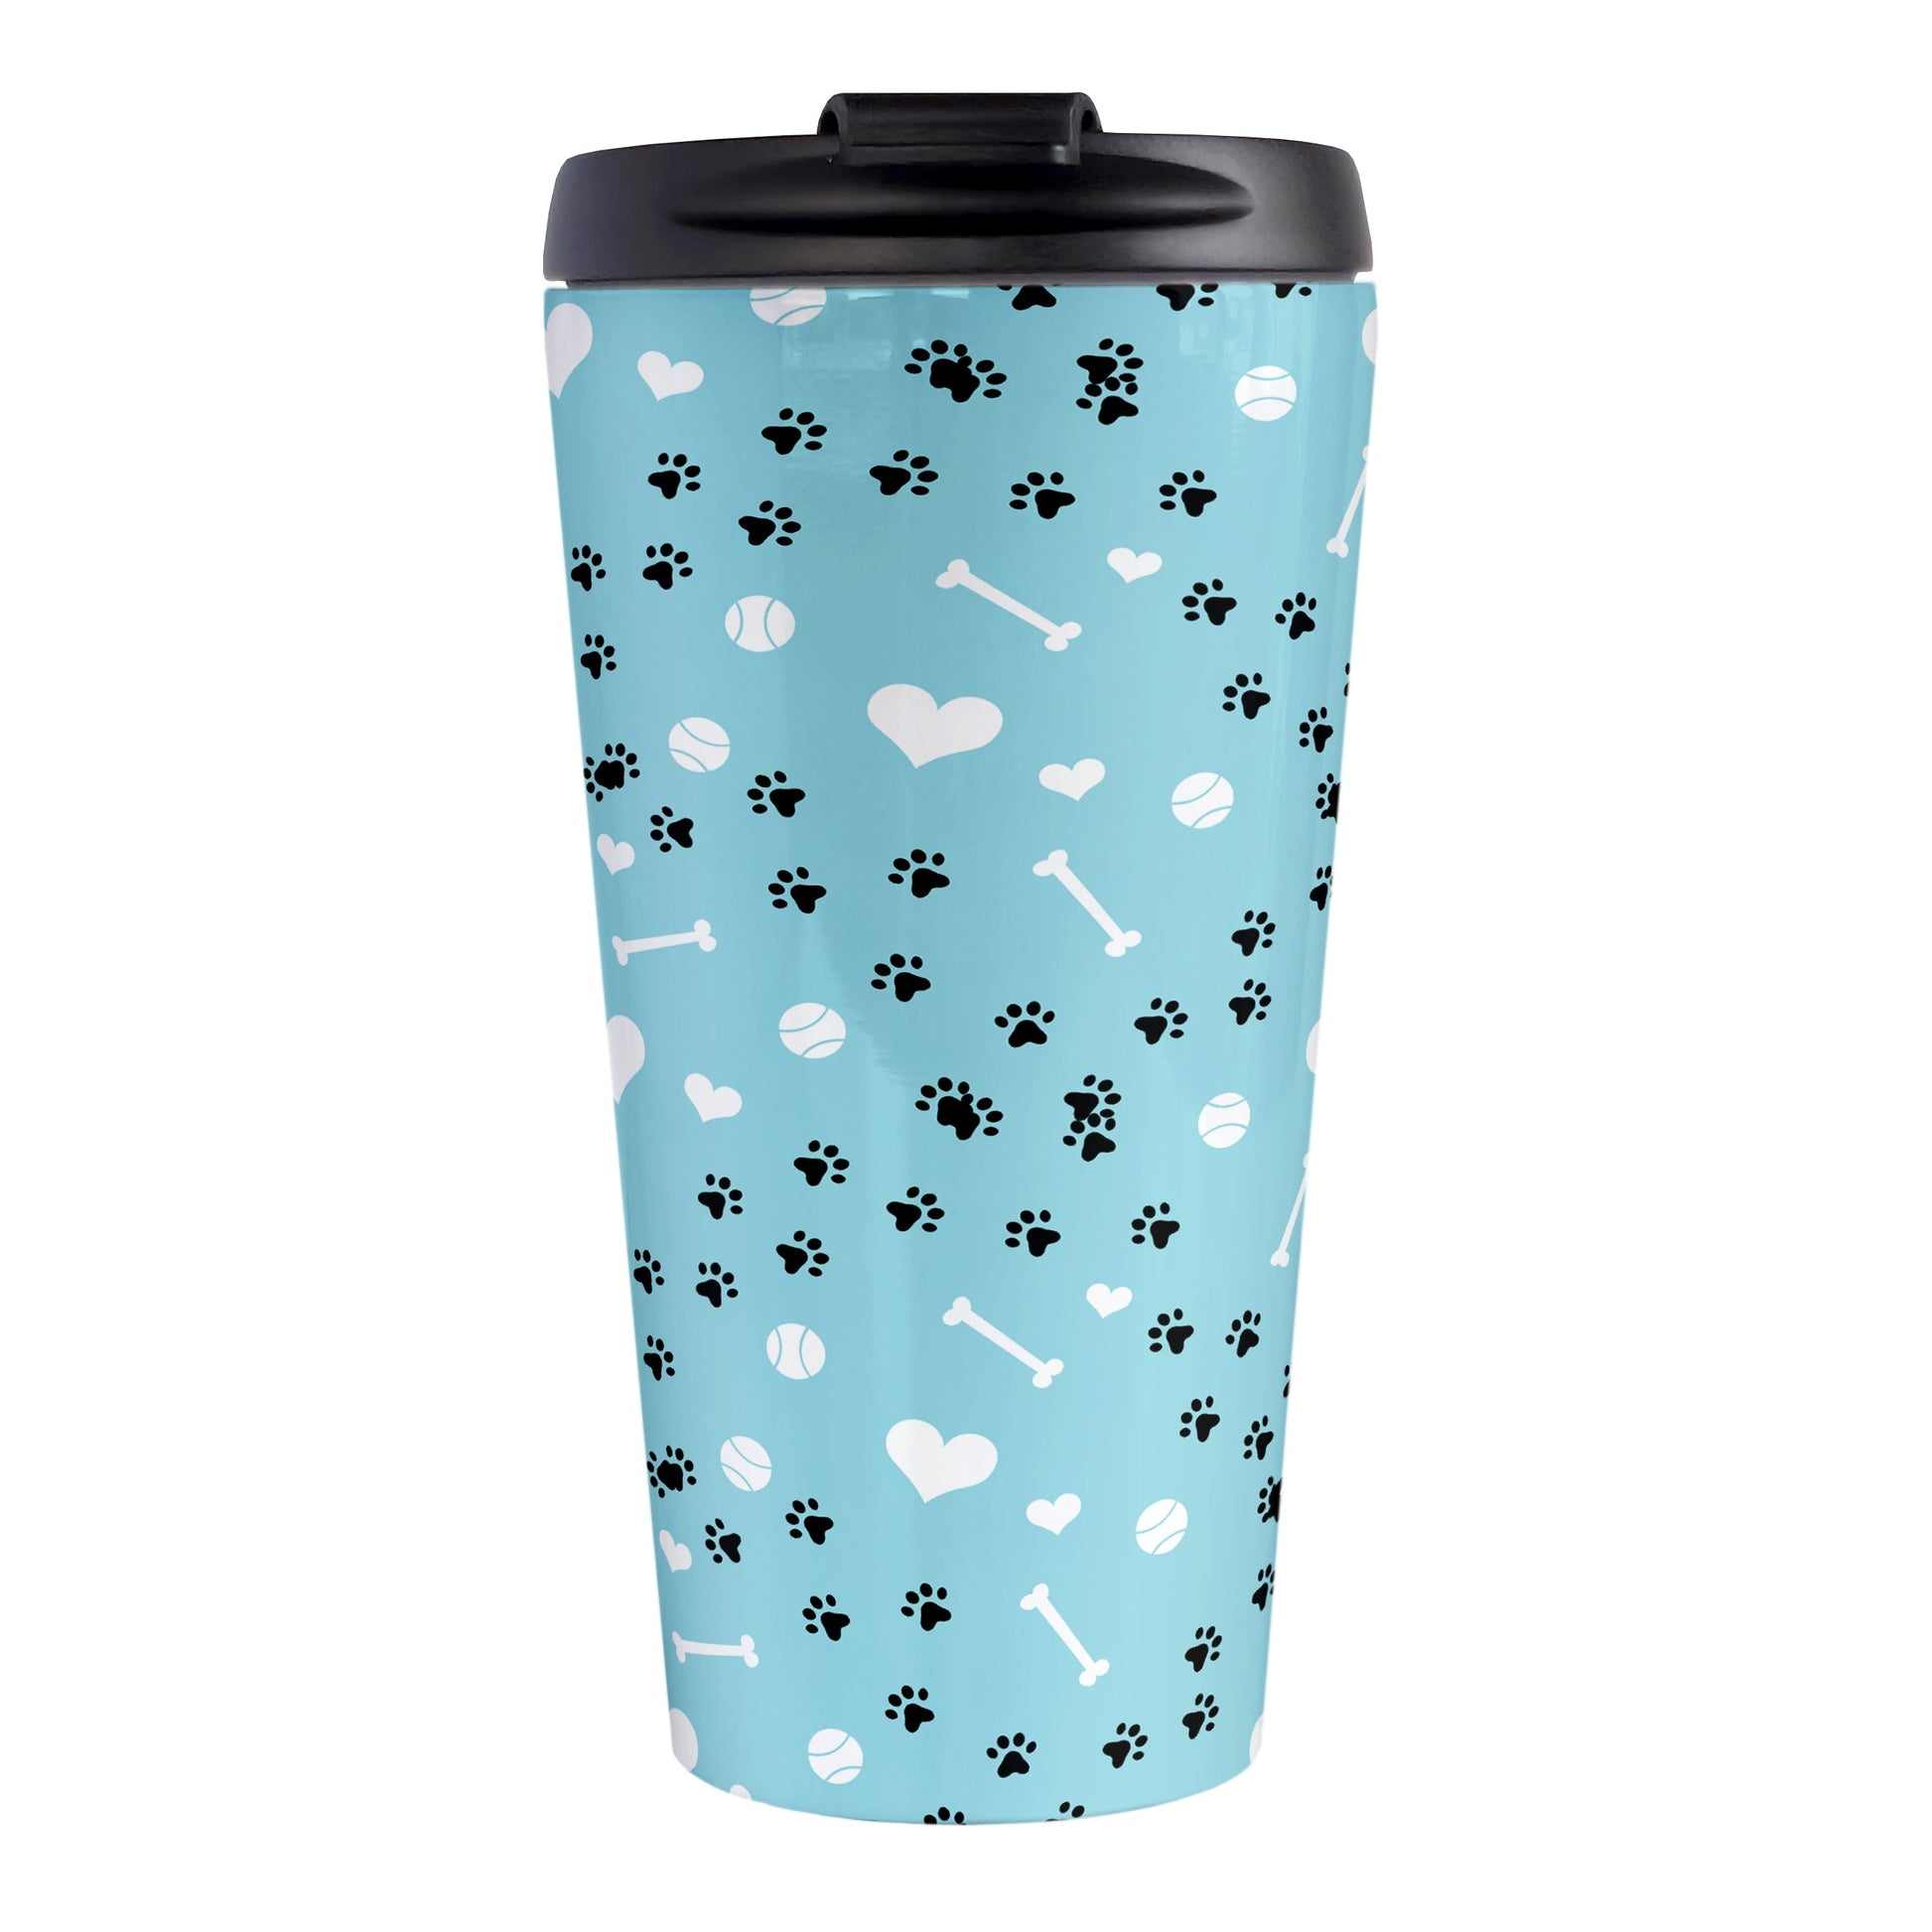 Puppy Run Blue Dog Travel Mug (15oz) at Amy's Coffee Mugs. A stainless steel travel mug designed with a pattern of chaotic tracks of puppy paw prints running around the mug with white dog bones, balls, and hearts over a light blue background. This mug is perfect for people who love the chaotic play of puppies, love dogs, and like blue travel mugs. 